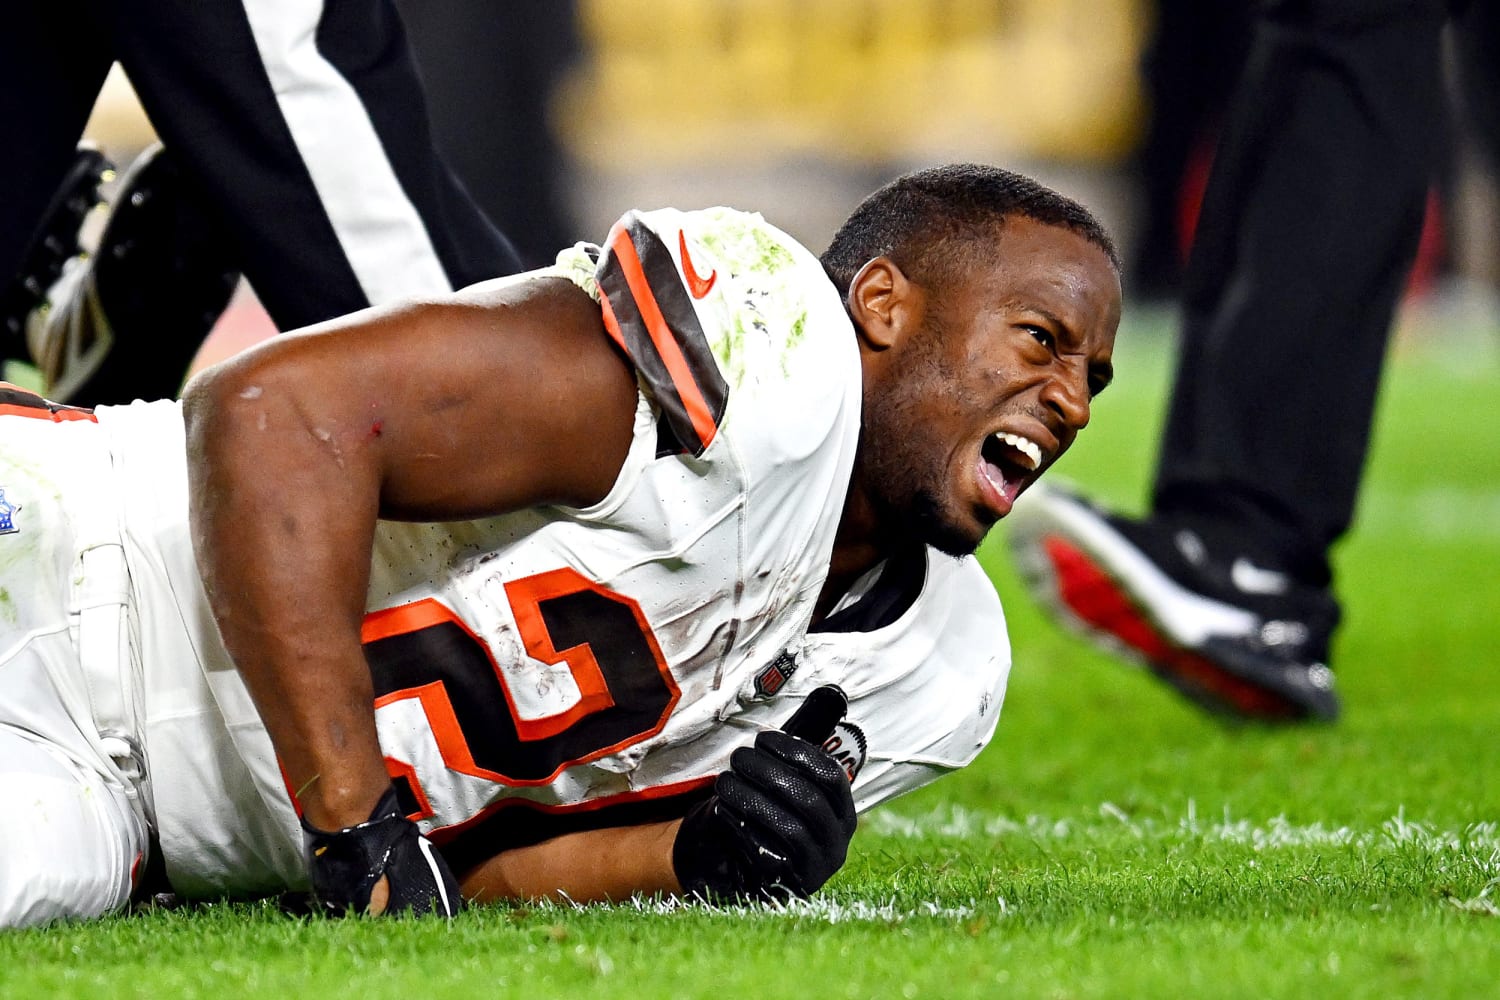 The Cleveland Browns have ruled Nick Chubb out for the season after a knee injury